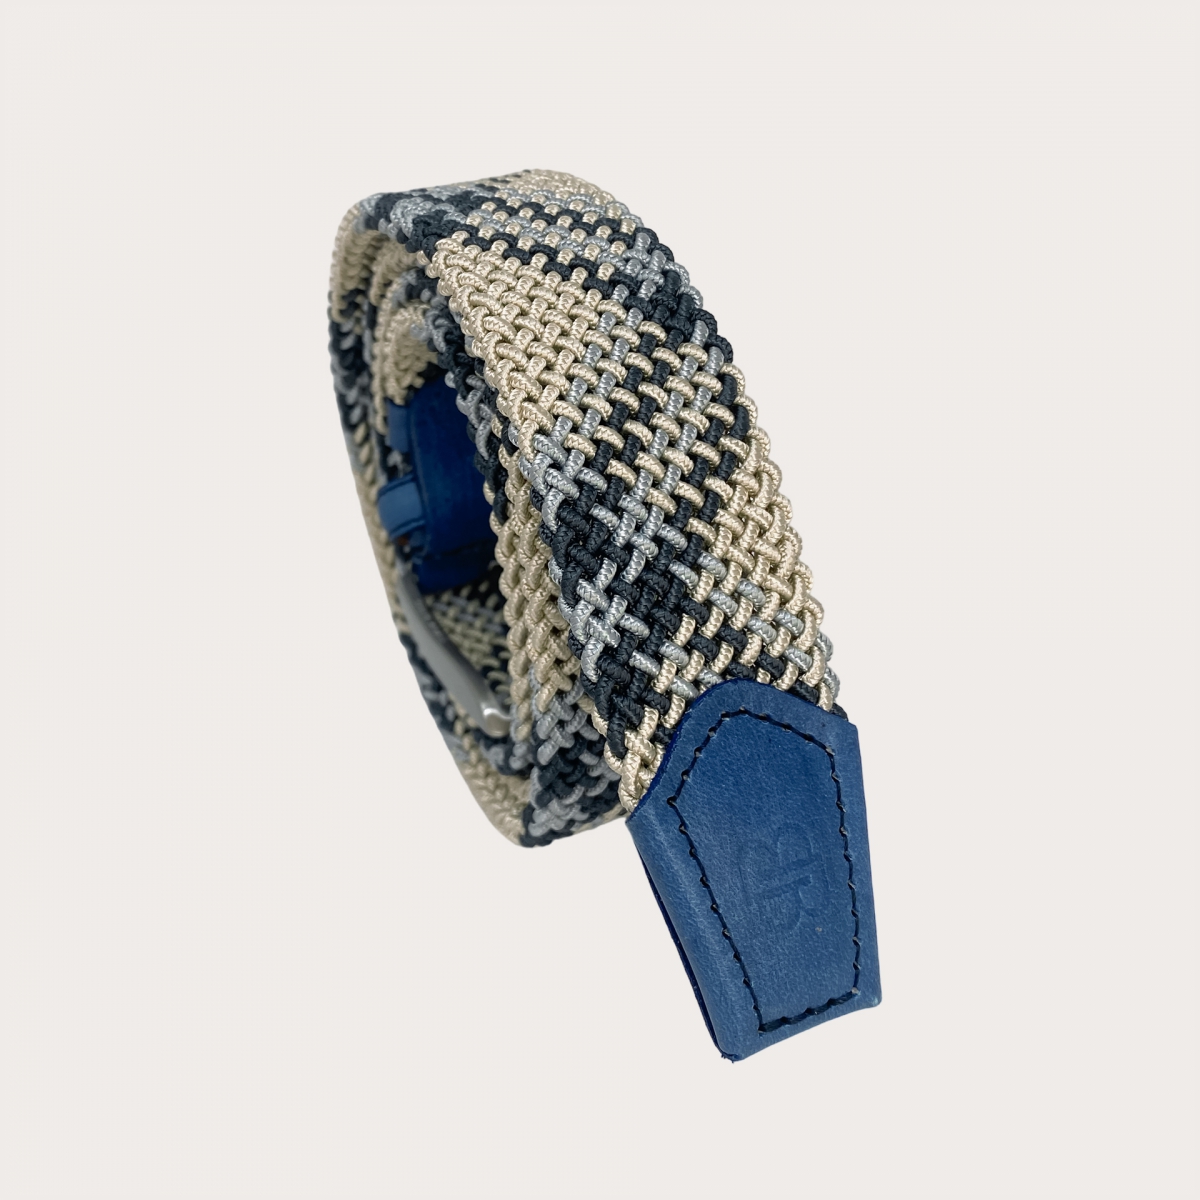 Woven Elastic Blue Belt with Sky-Blue and Beige Pattern